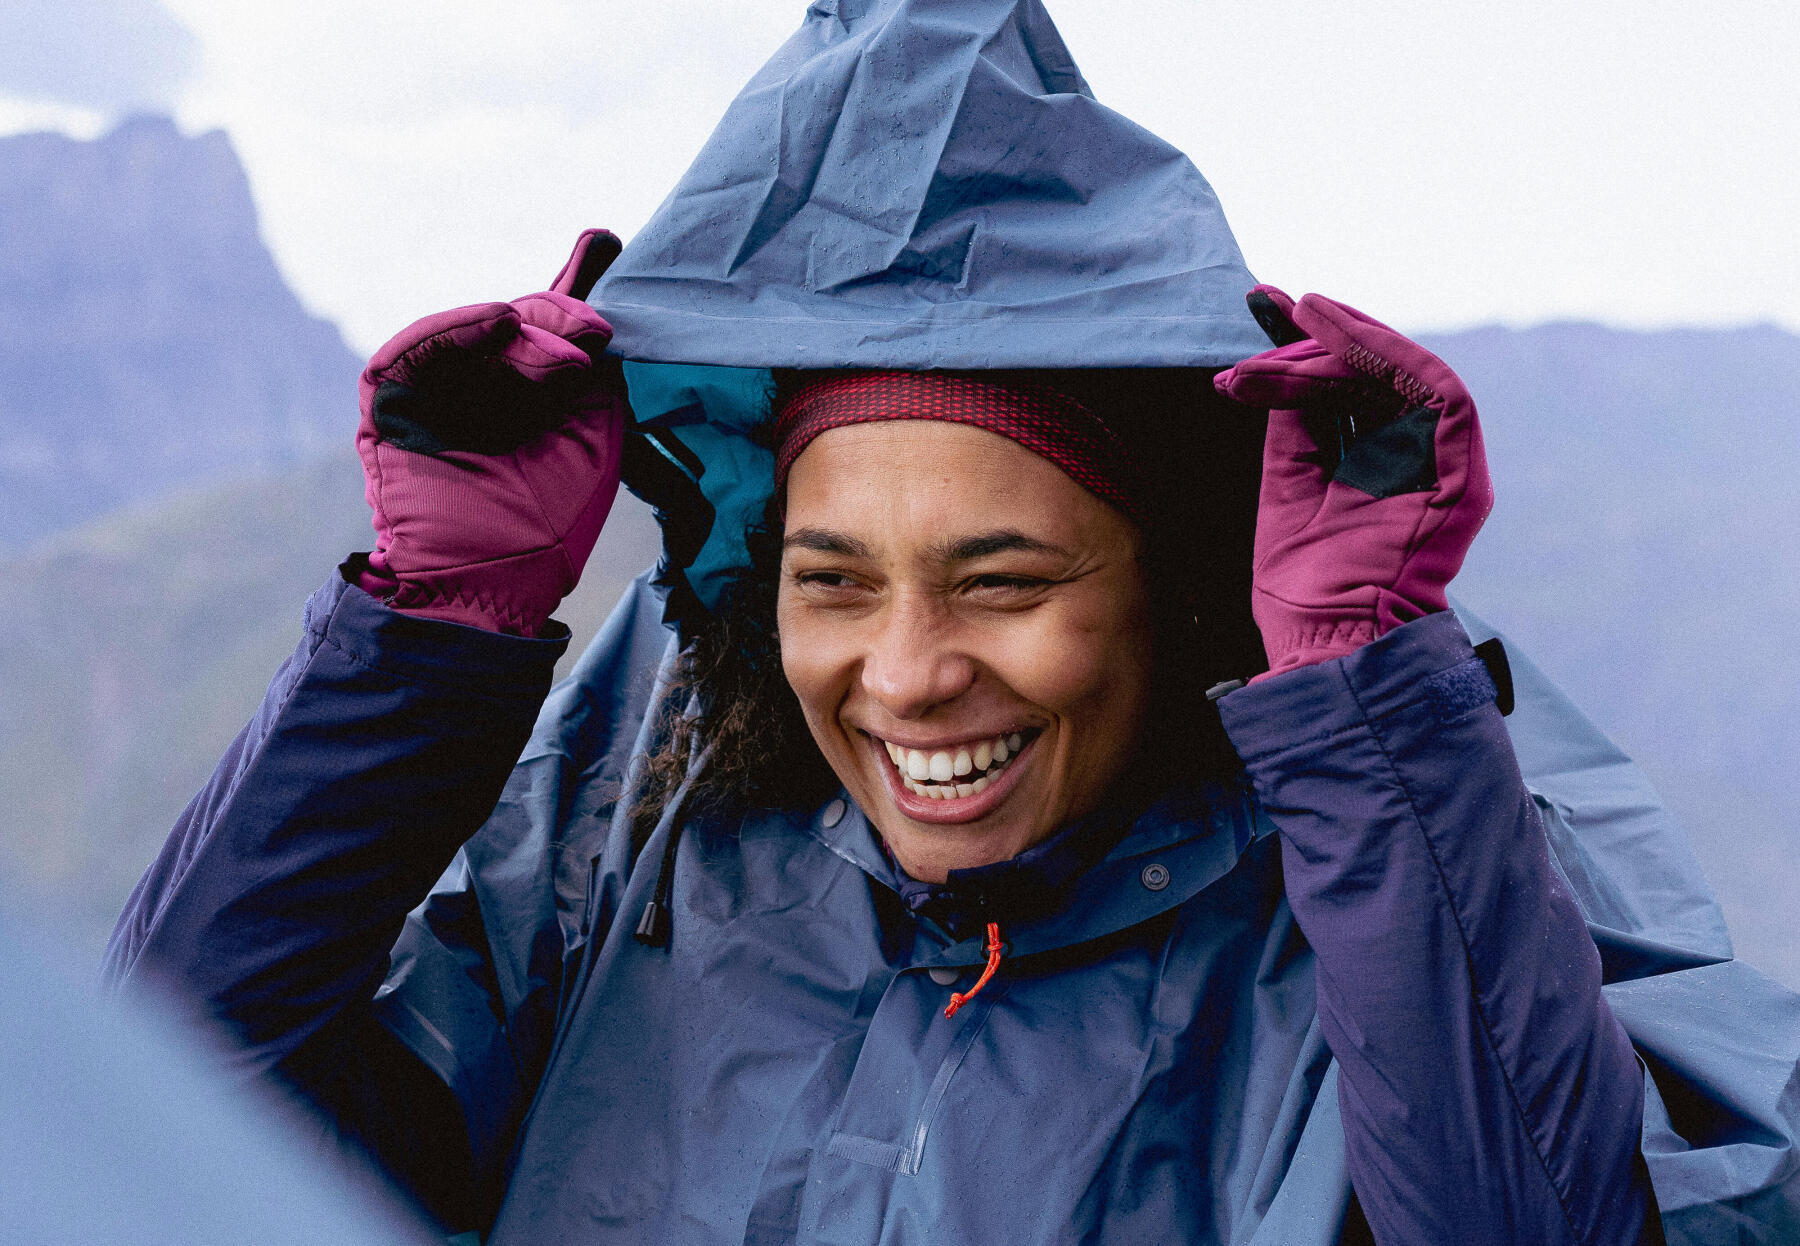 Choosing a poncho for your next hike